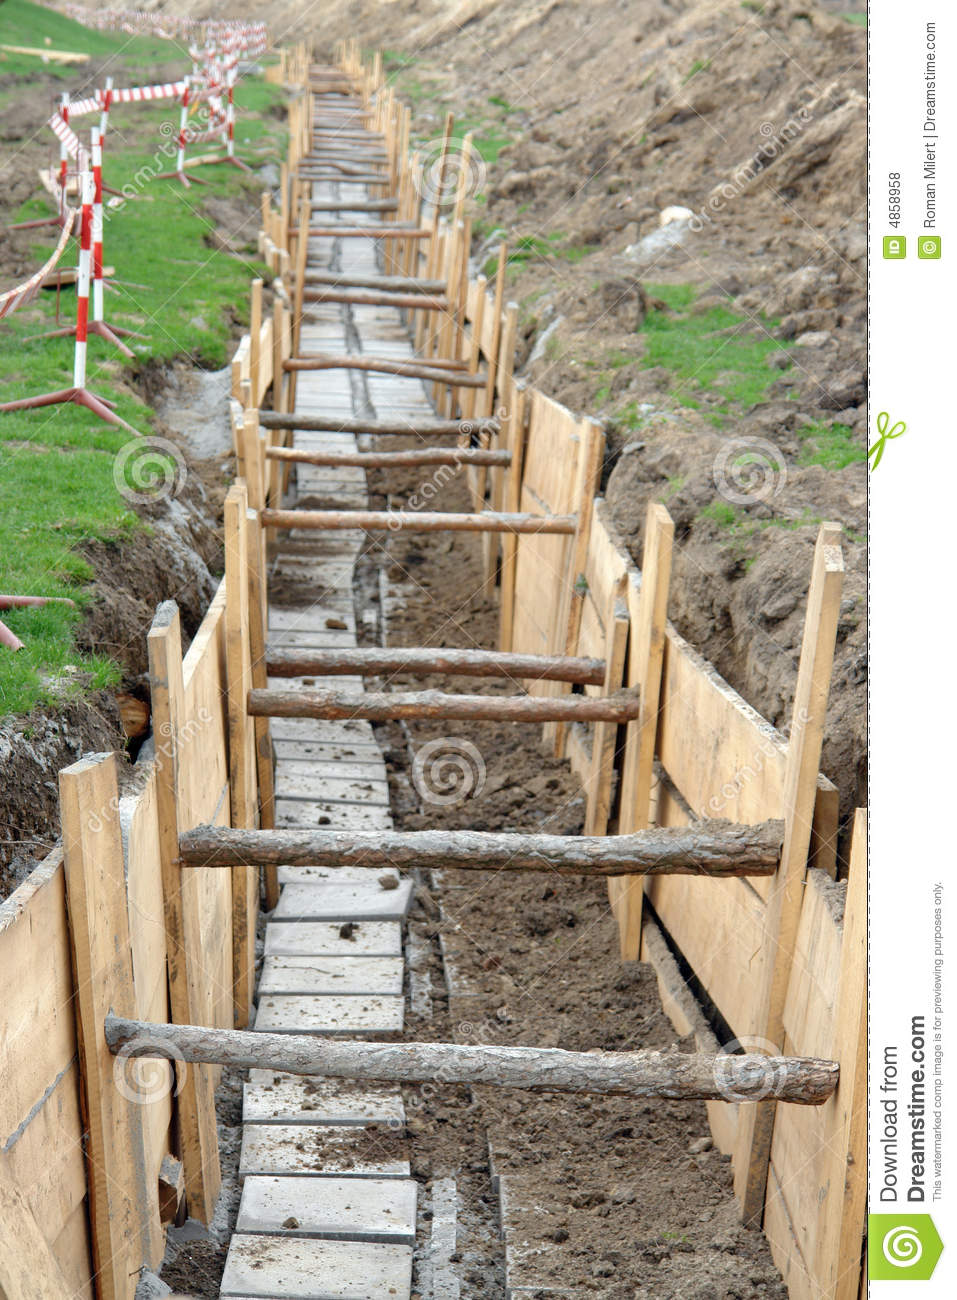 Long Earth Excavation Protected On Two Sides By Wooden Shuttering